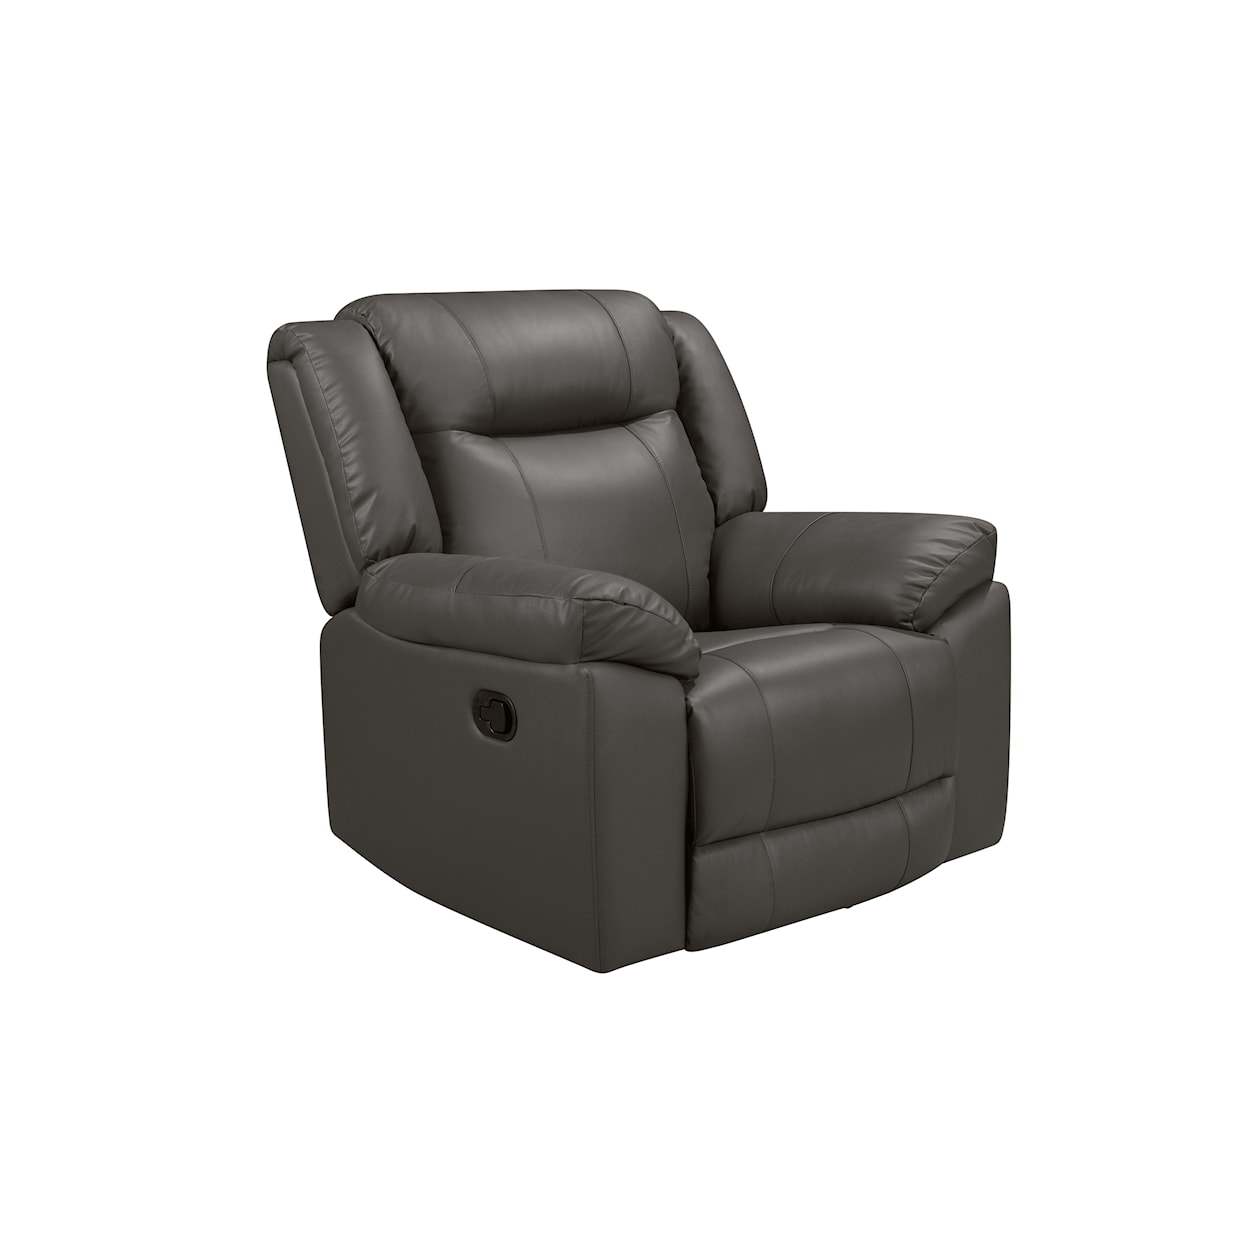 New Classic Furniture Taggart Leather Rocker Recliner